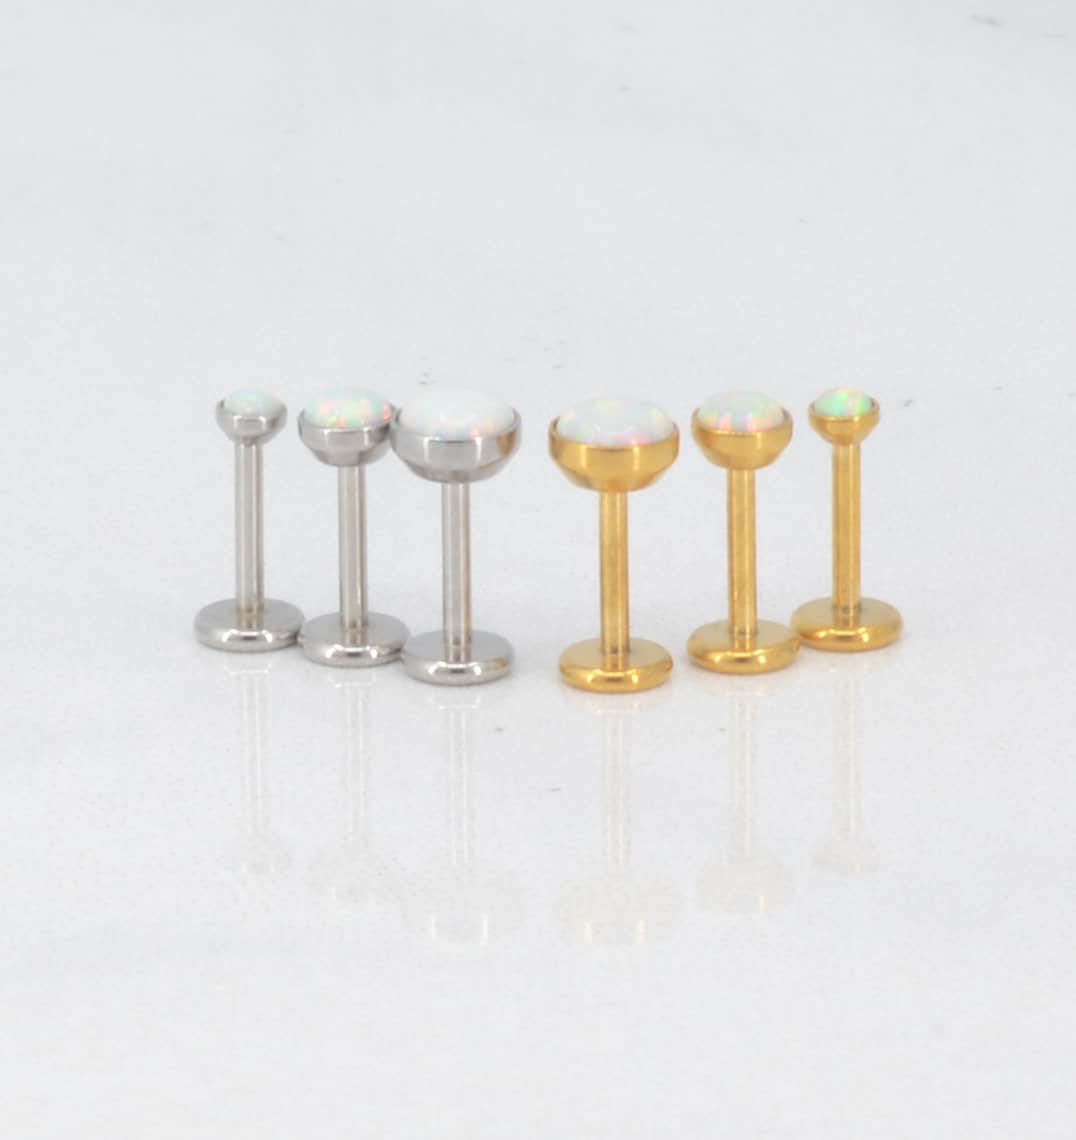 Flat Back Earrings Threadless 16G/18G/20G Push Pin Nose Ring Cartilage Gold Tone Labret Stud Triple Helix 2-4mm White Fire & Ice Opal